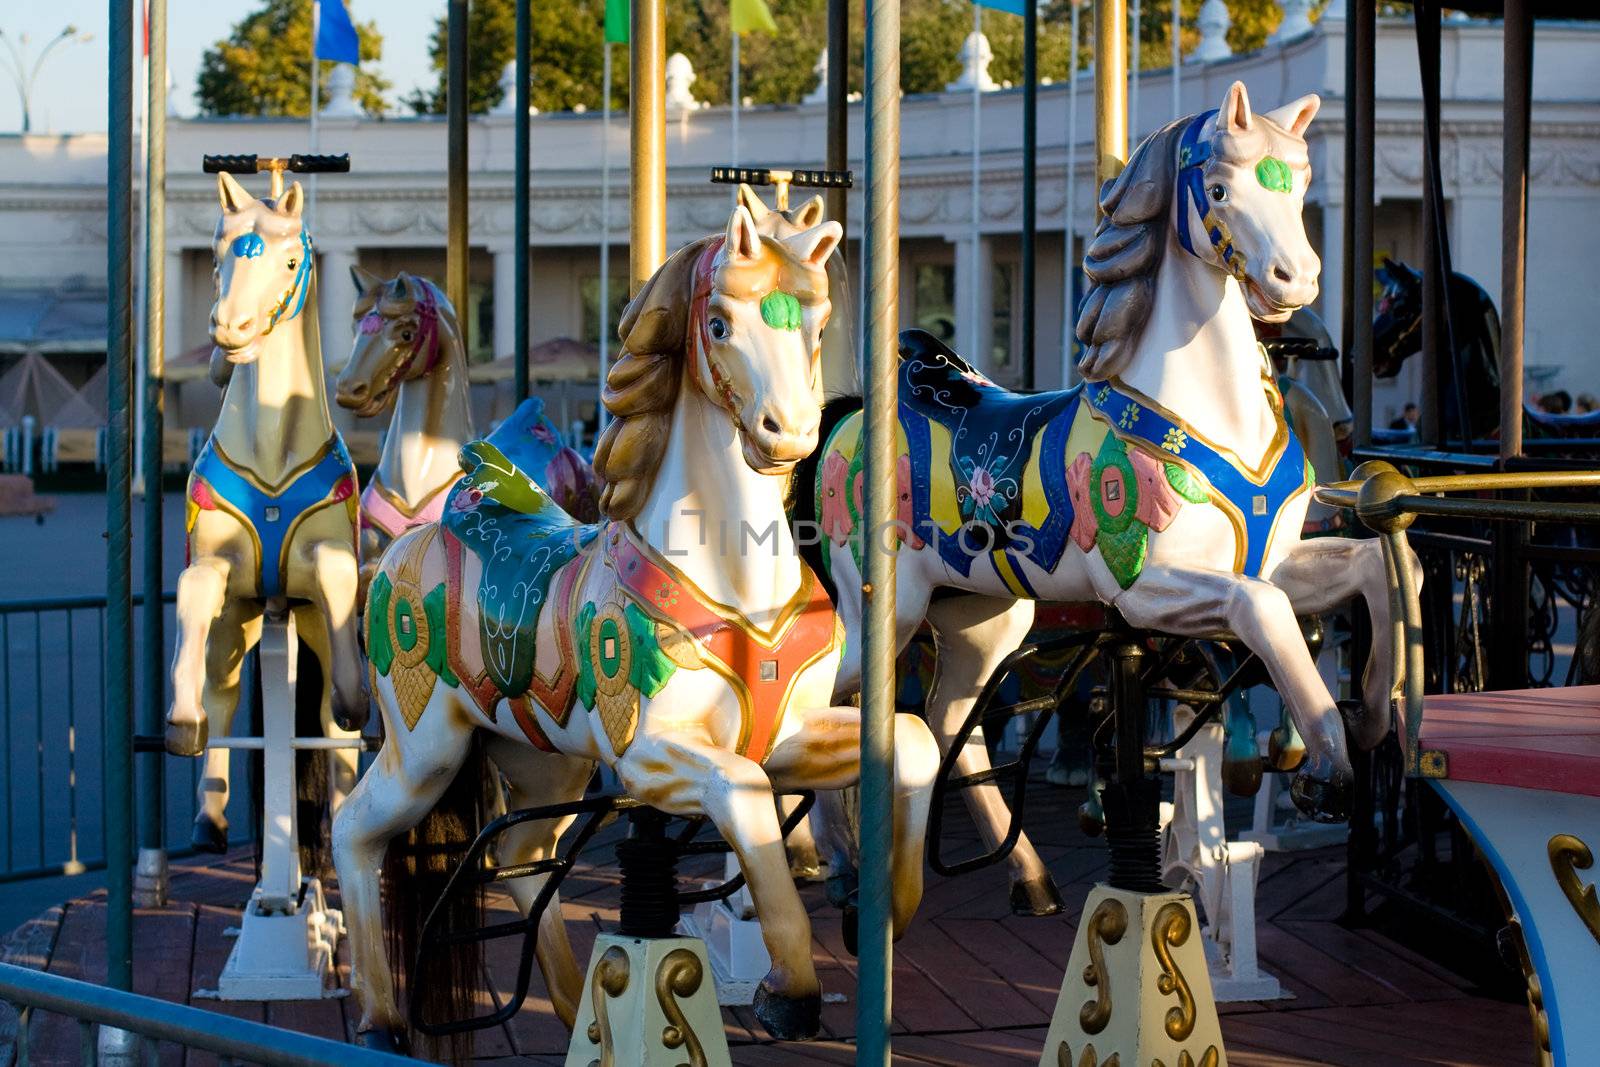 Merry go round at the park (carousel horse)